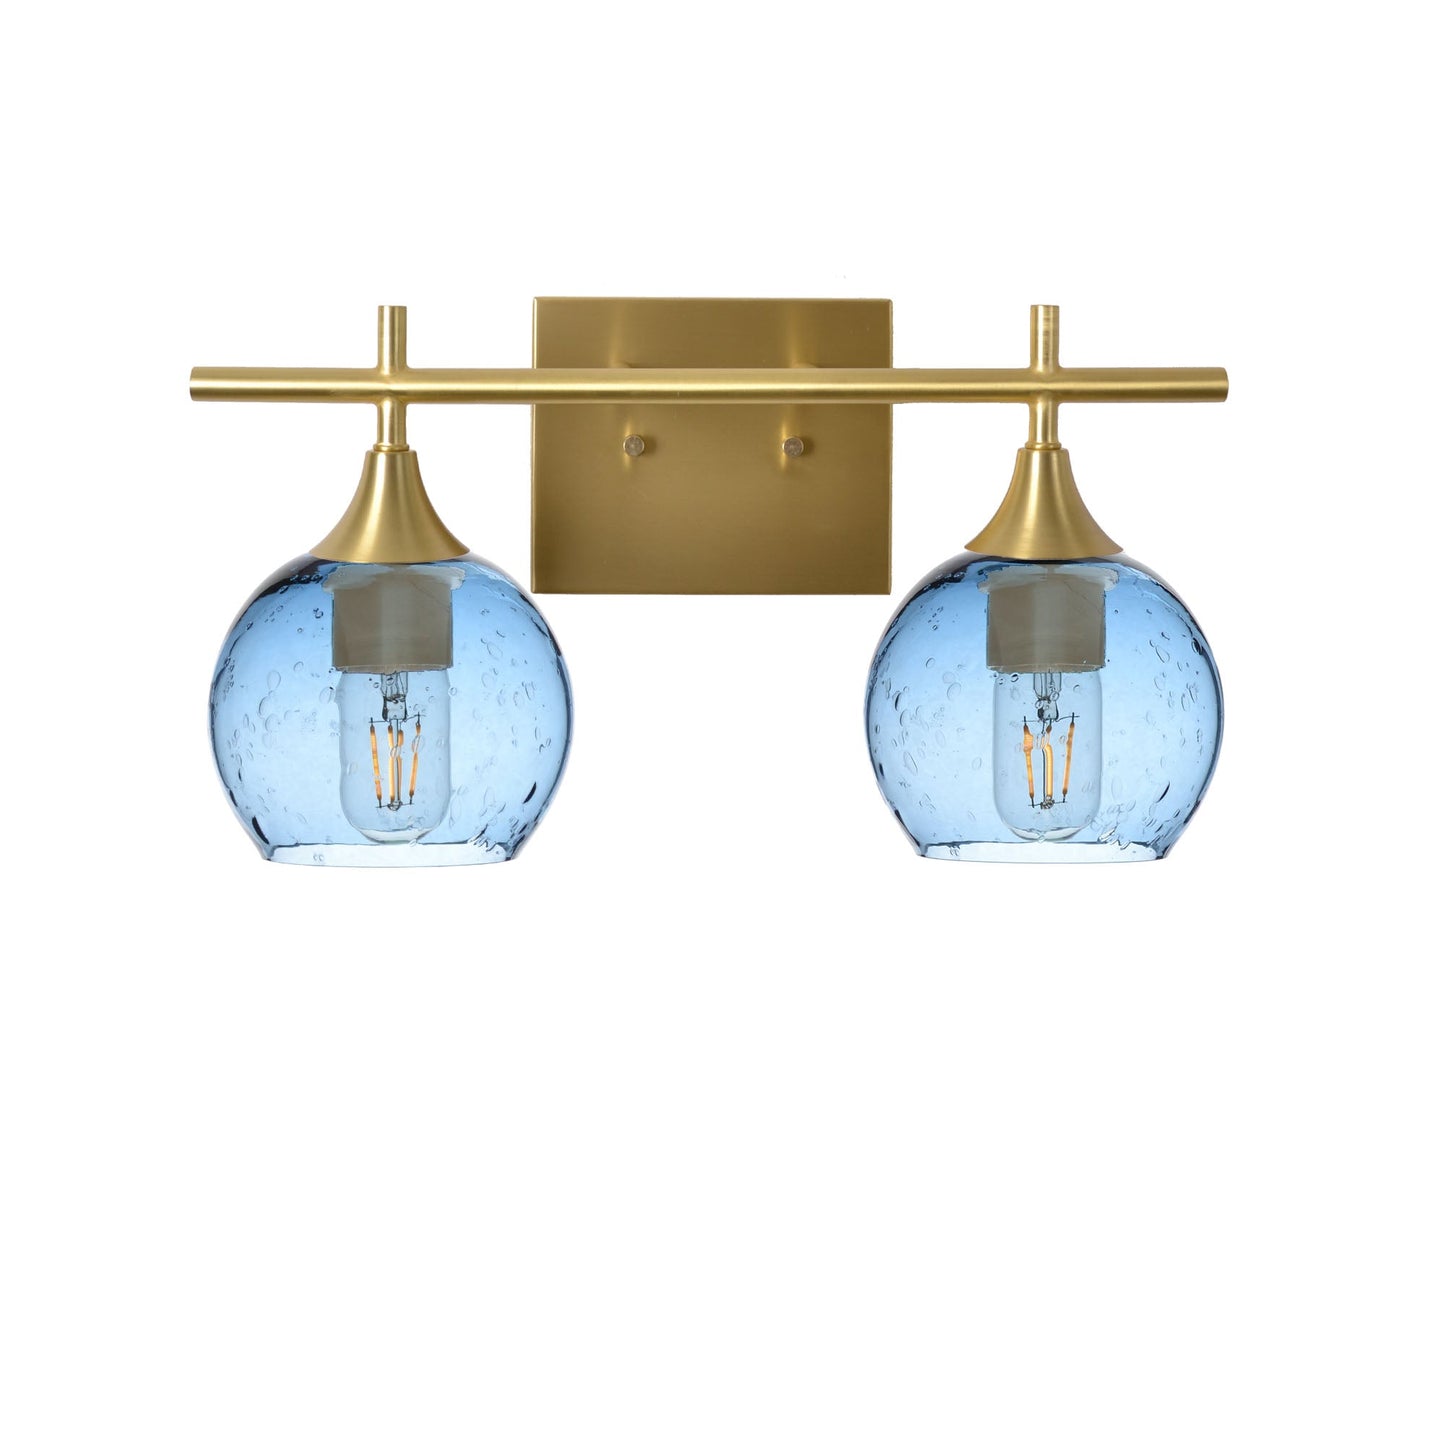 763 Lunar: 2 Light Wall Vanity-Glass-Bicycle Glass Co - Hotshop-Steel Blue-Satin Brass-Bicycle Glass Co